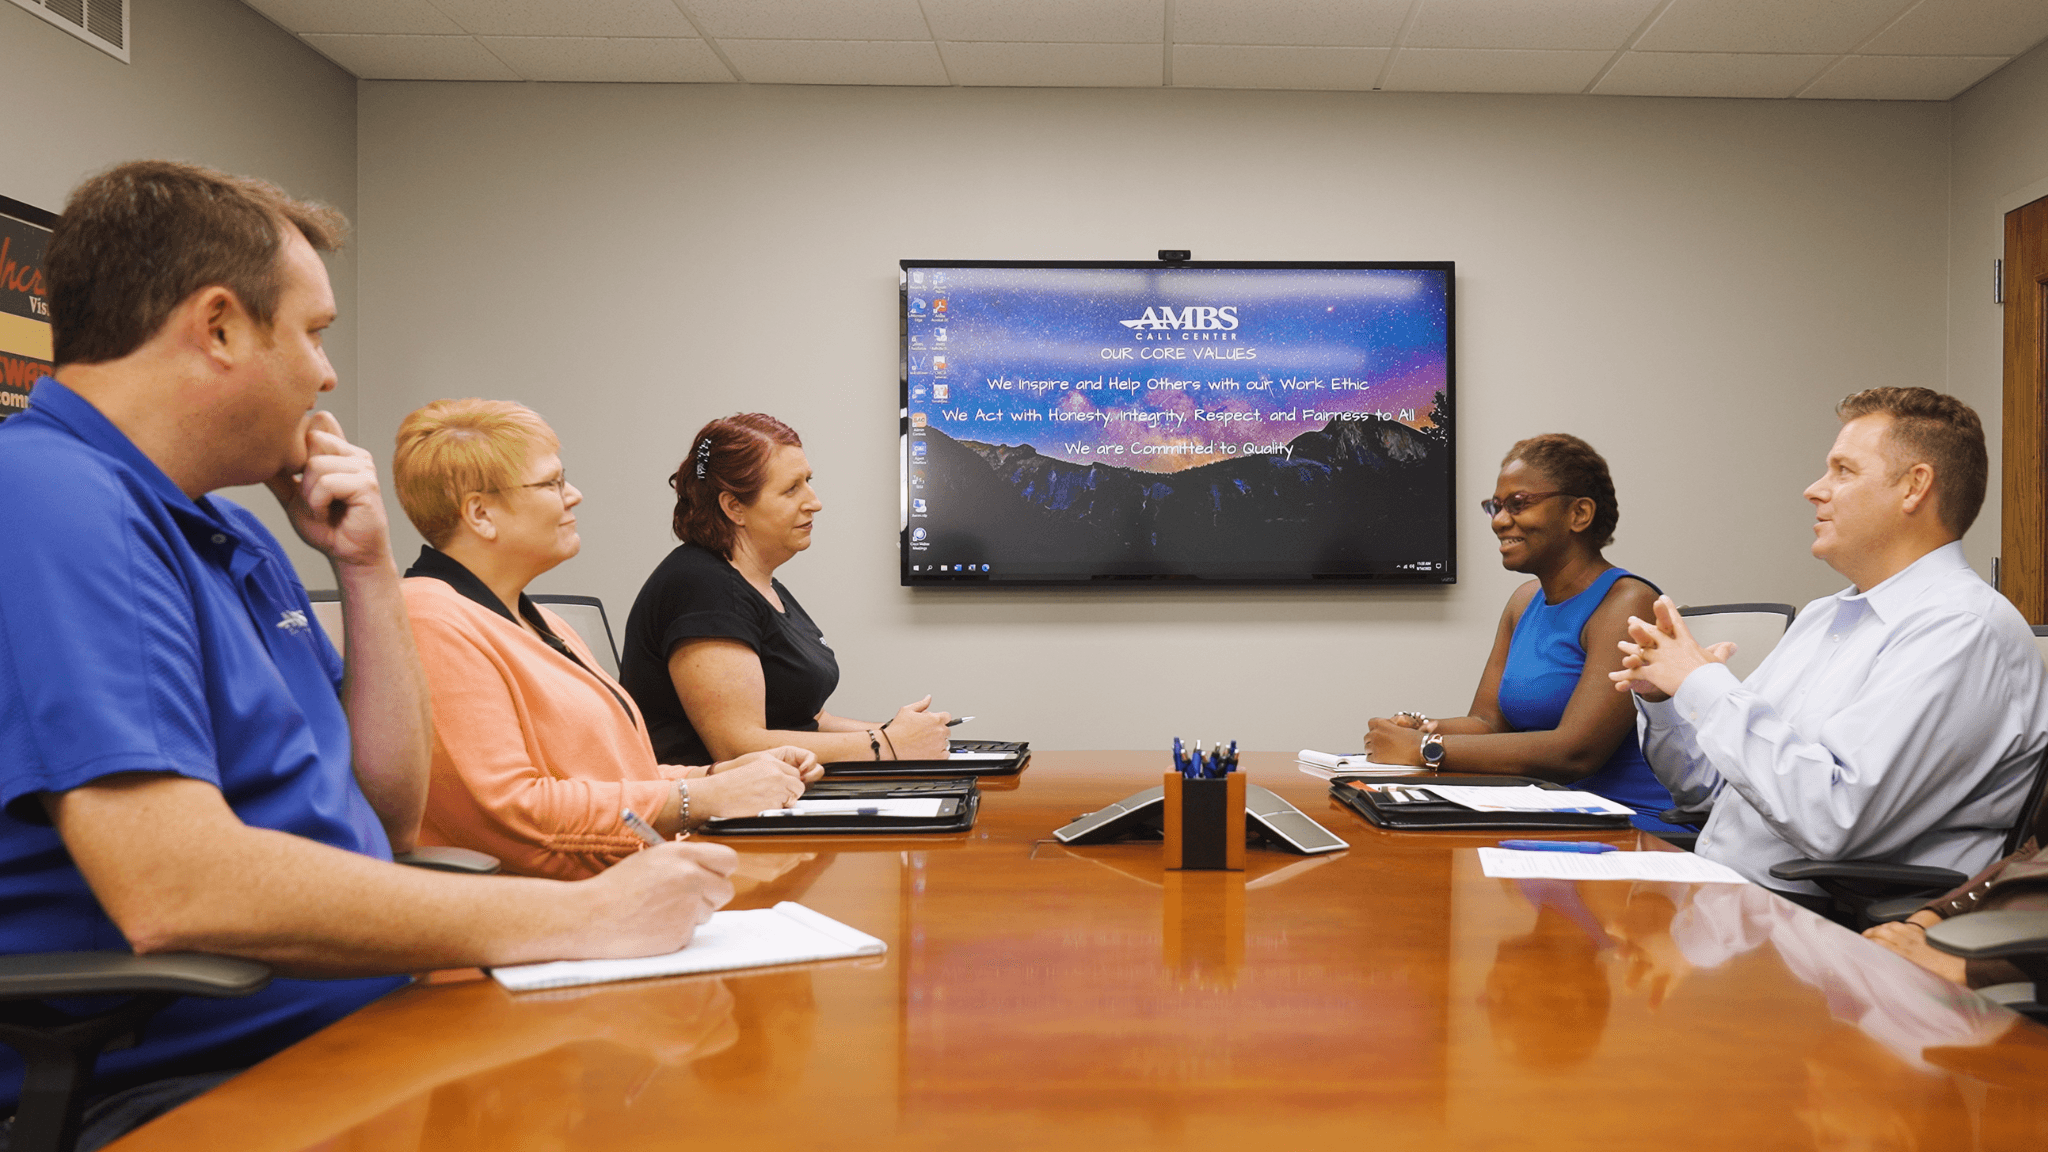 Ambs Team call center jobs smiling in Conference Room Cropped